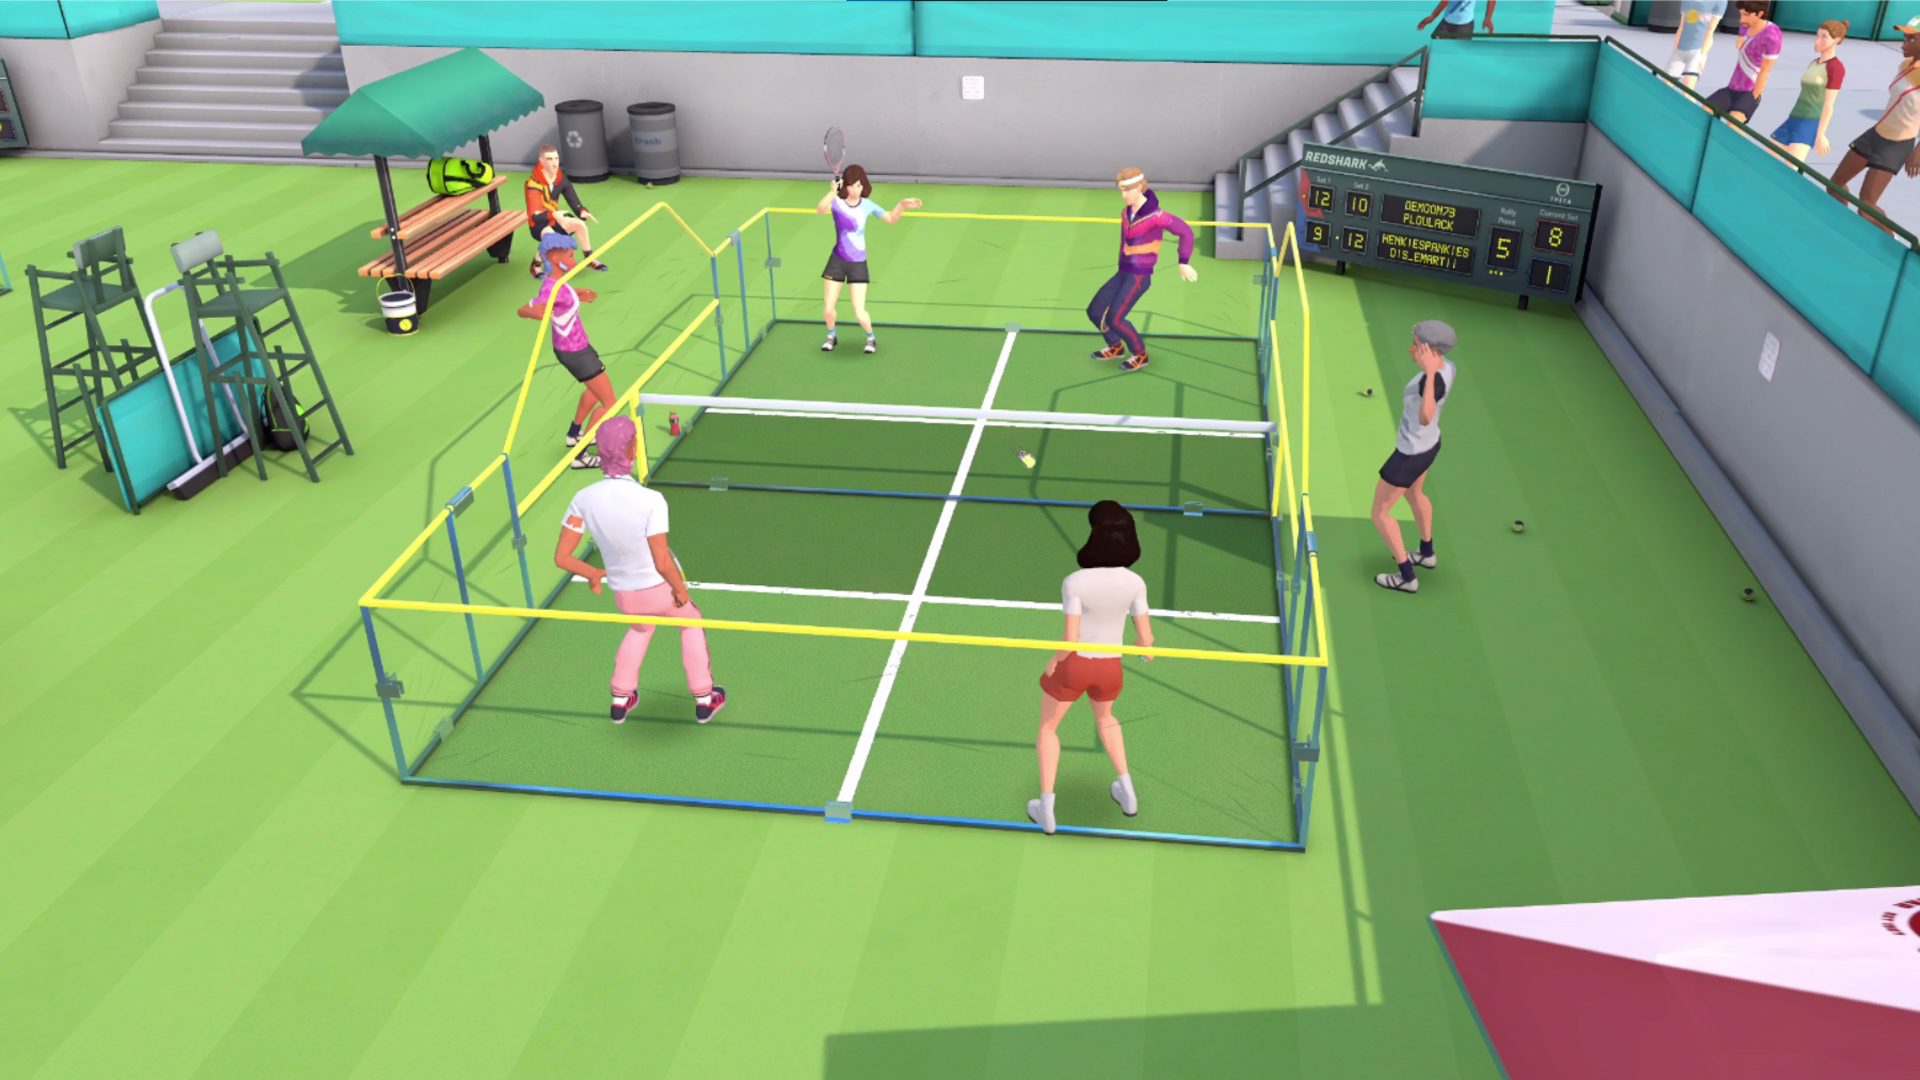 ‘Racket Club’ Update Brings More Flexibility with New Rules and Fan Favorite Modes